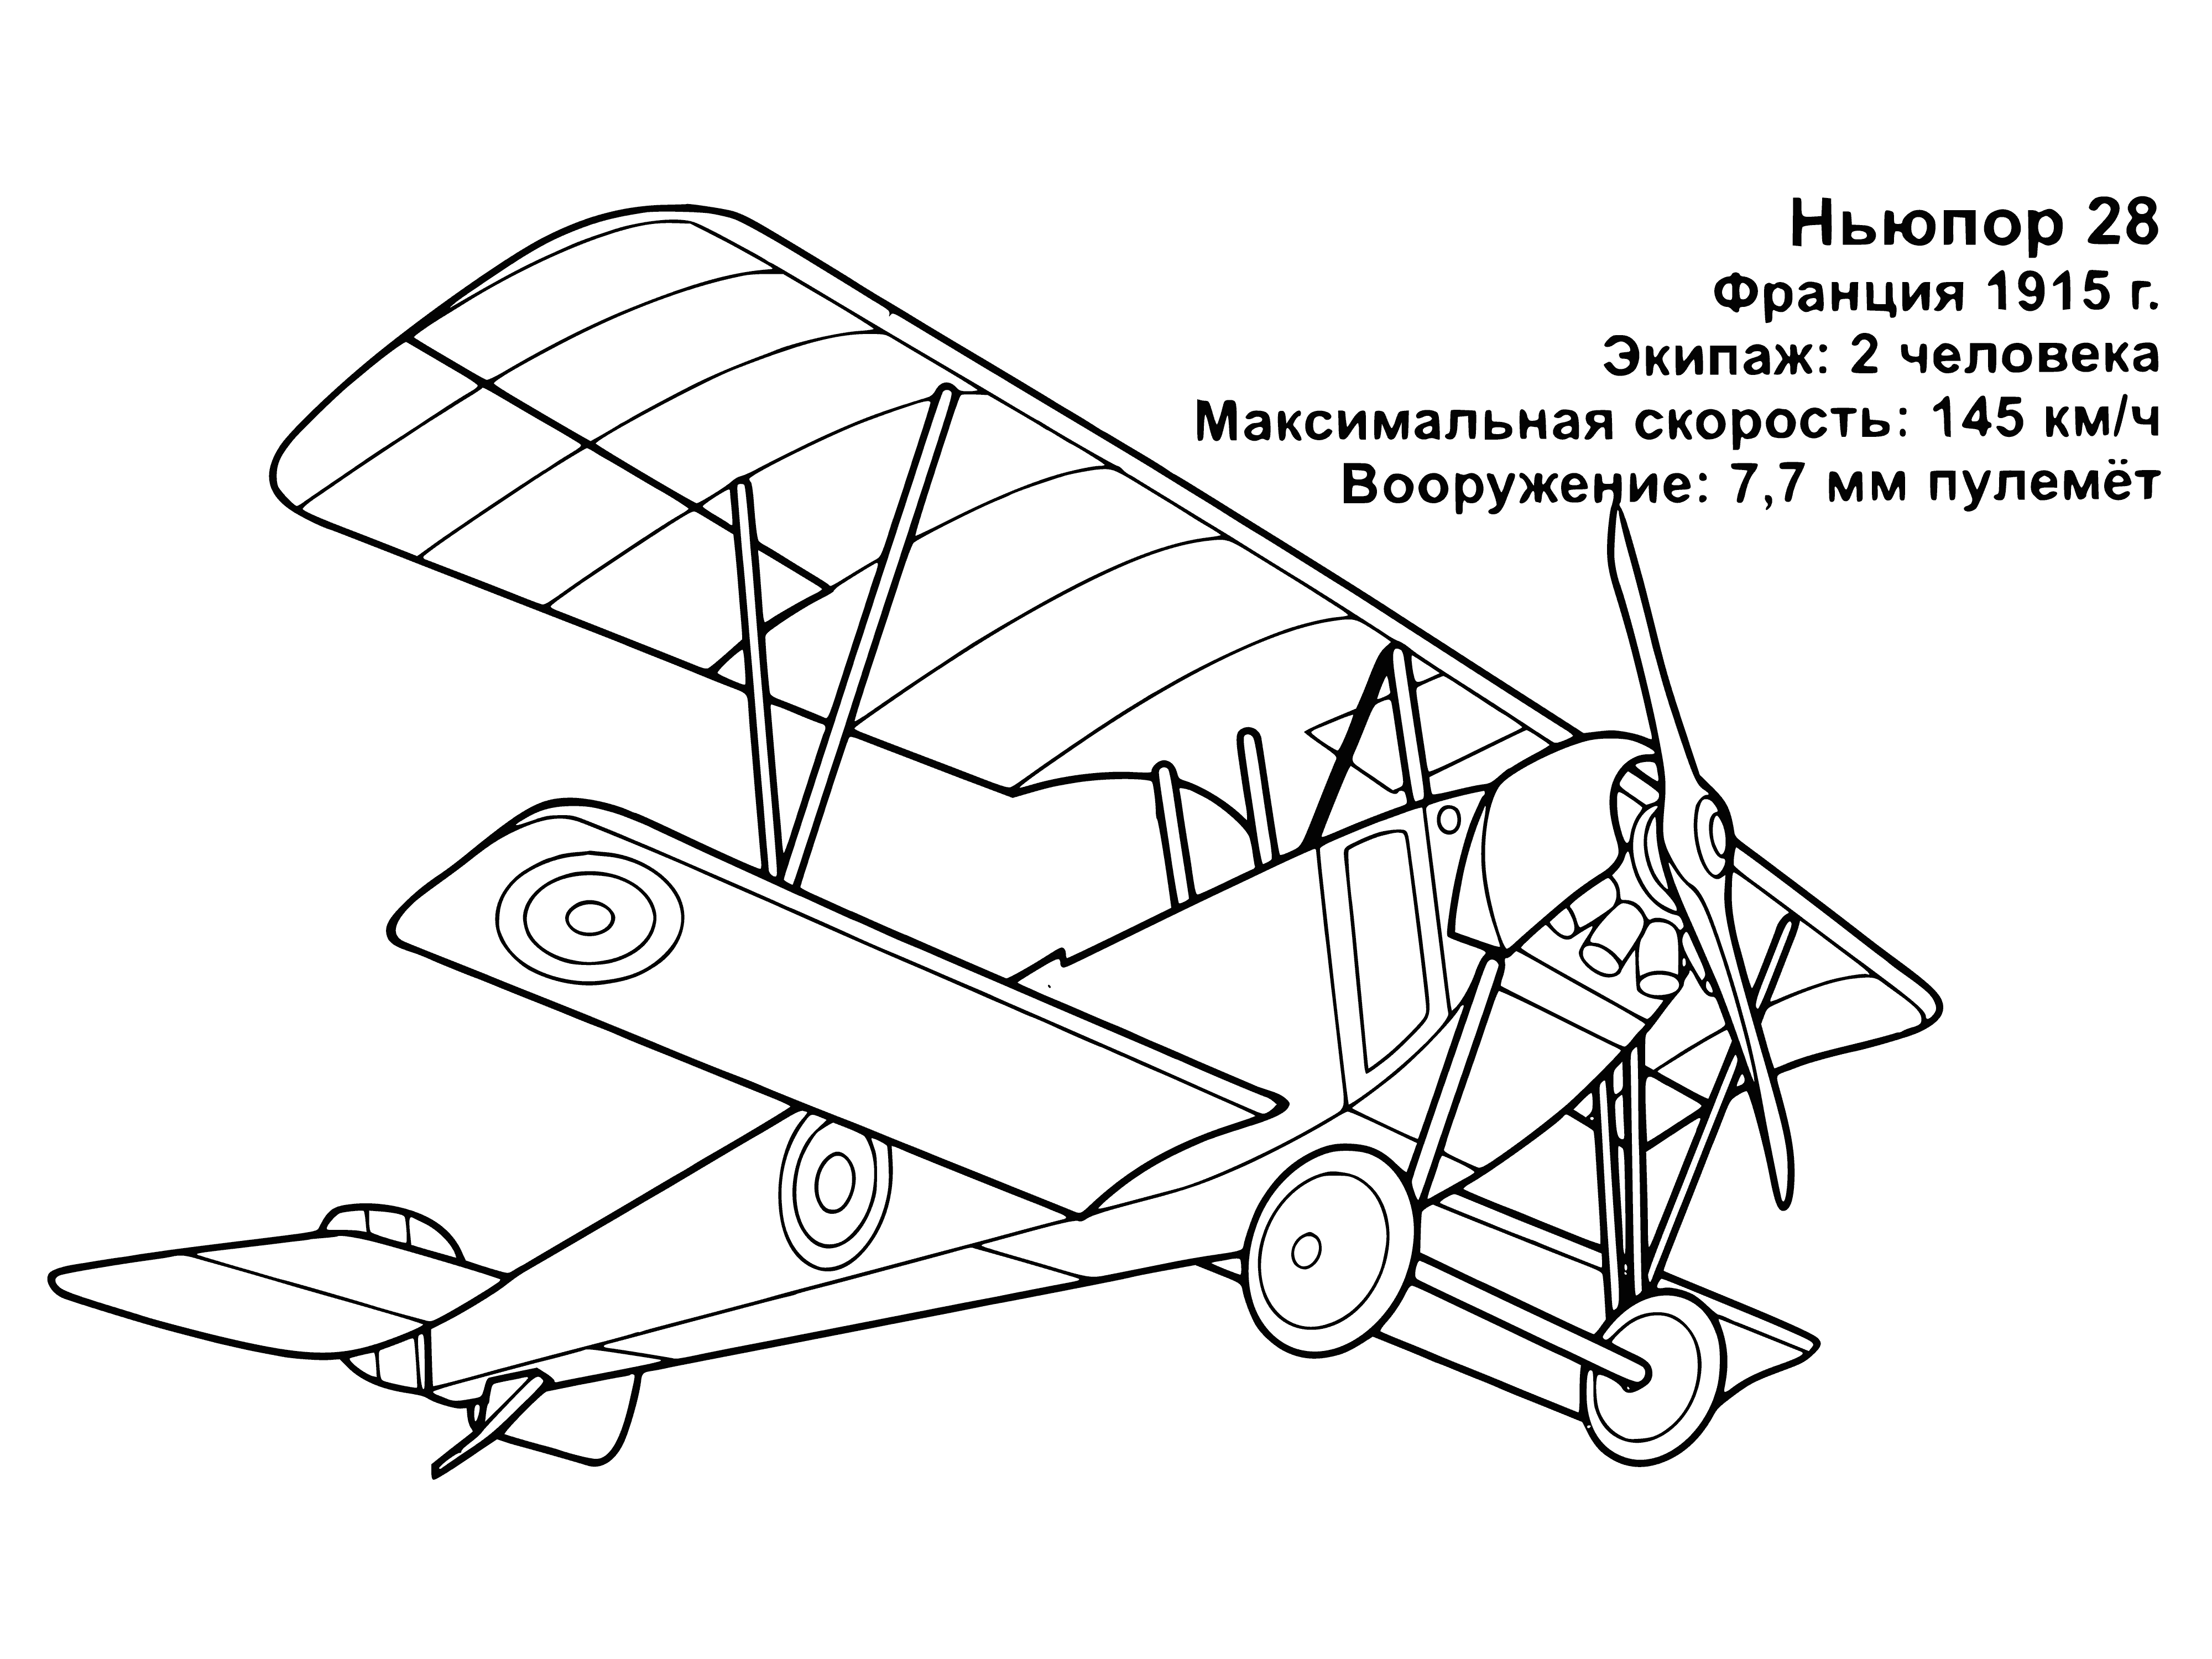 coloring page: Small cockpit, large wings, 2 propellers, tall & thin tail. Light blue & white stripes, perfect for a flight!